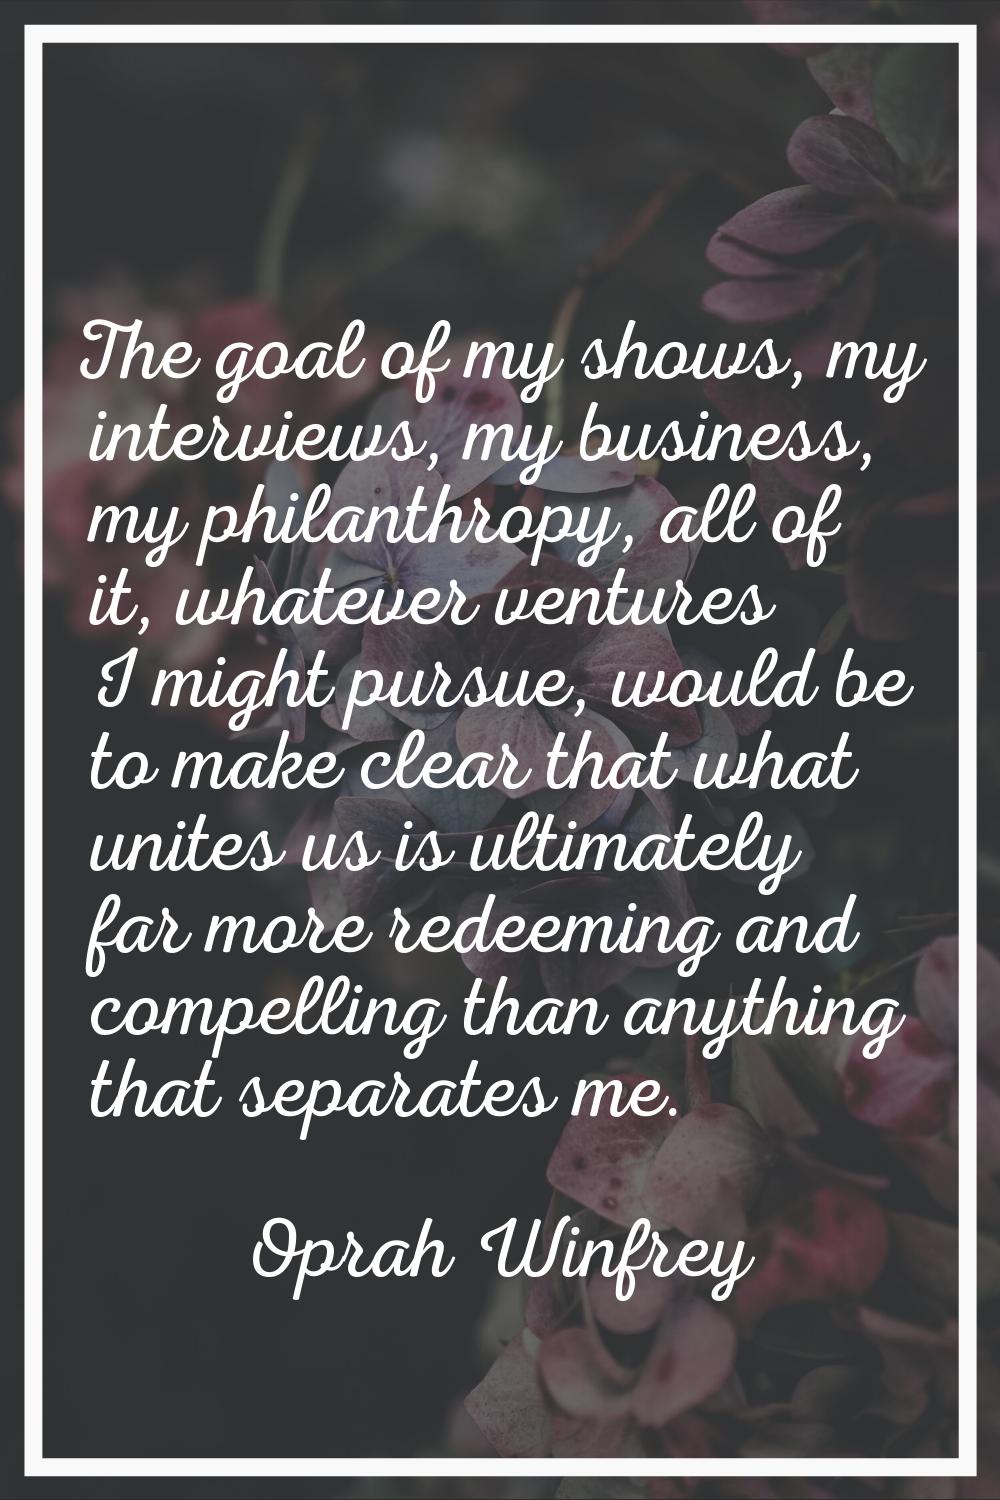 The goal of my shows, my interviews, my business, my philanthropy, all of it, whatever ventures I m